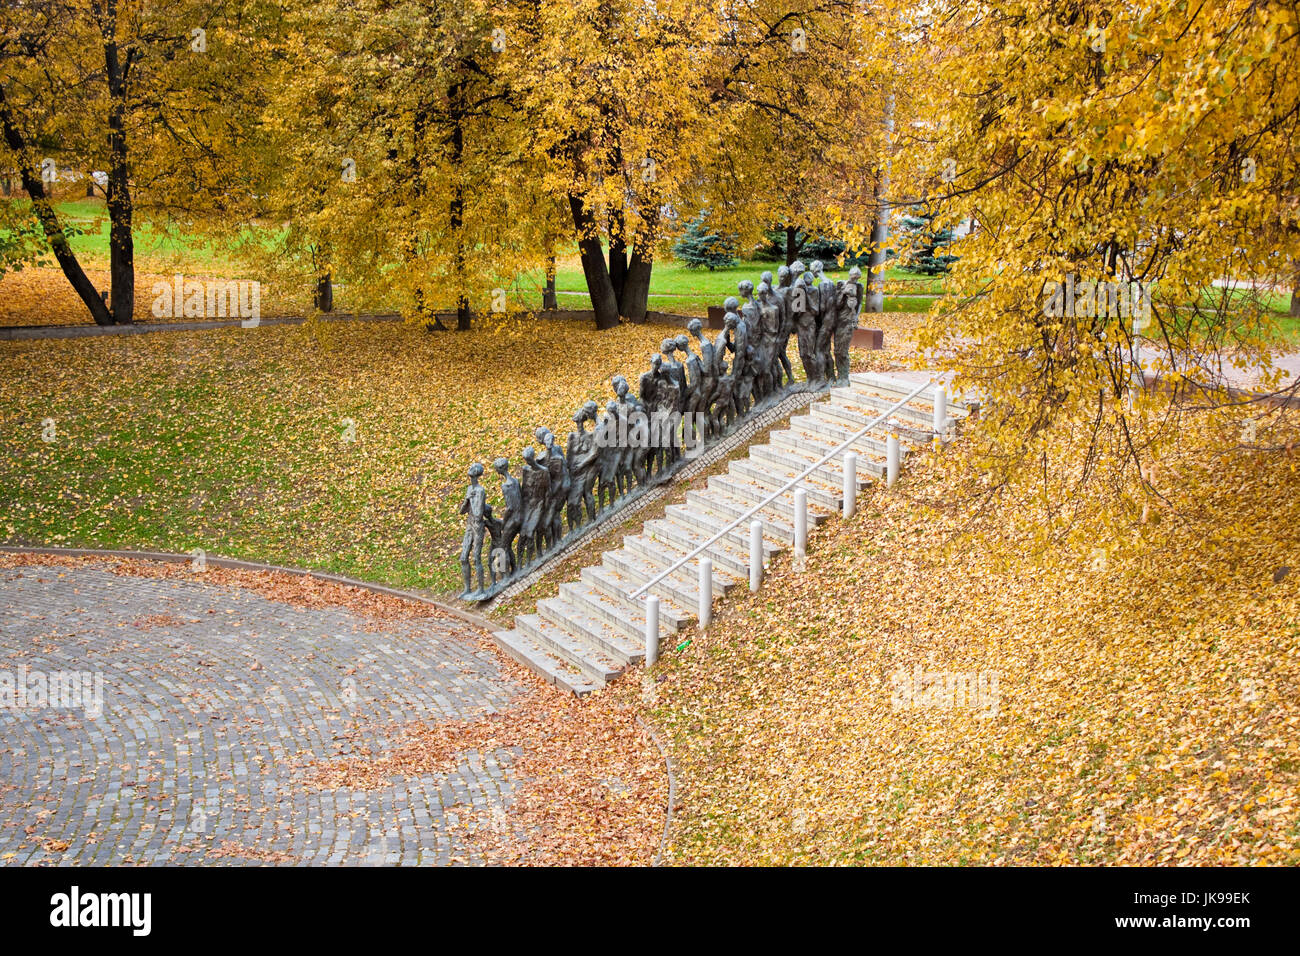 Minsk, Belarus - October 13, 2014: The Last Way - the fragment of memorial complex The Pit devoted to people killed in jewish ghetto in Minsk, Belarus Stock Photo